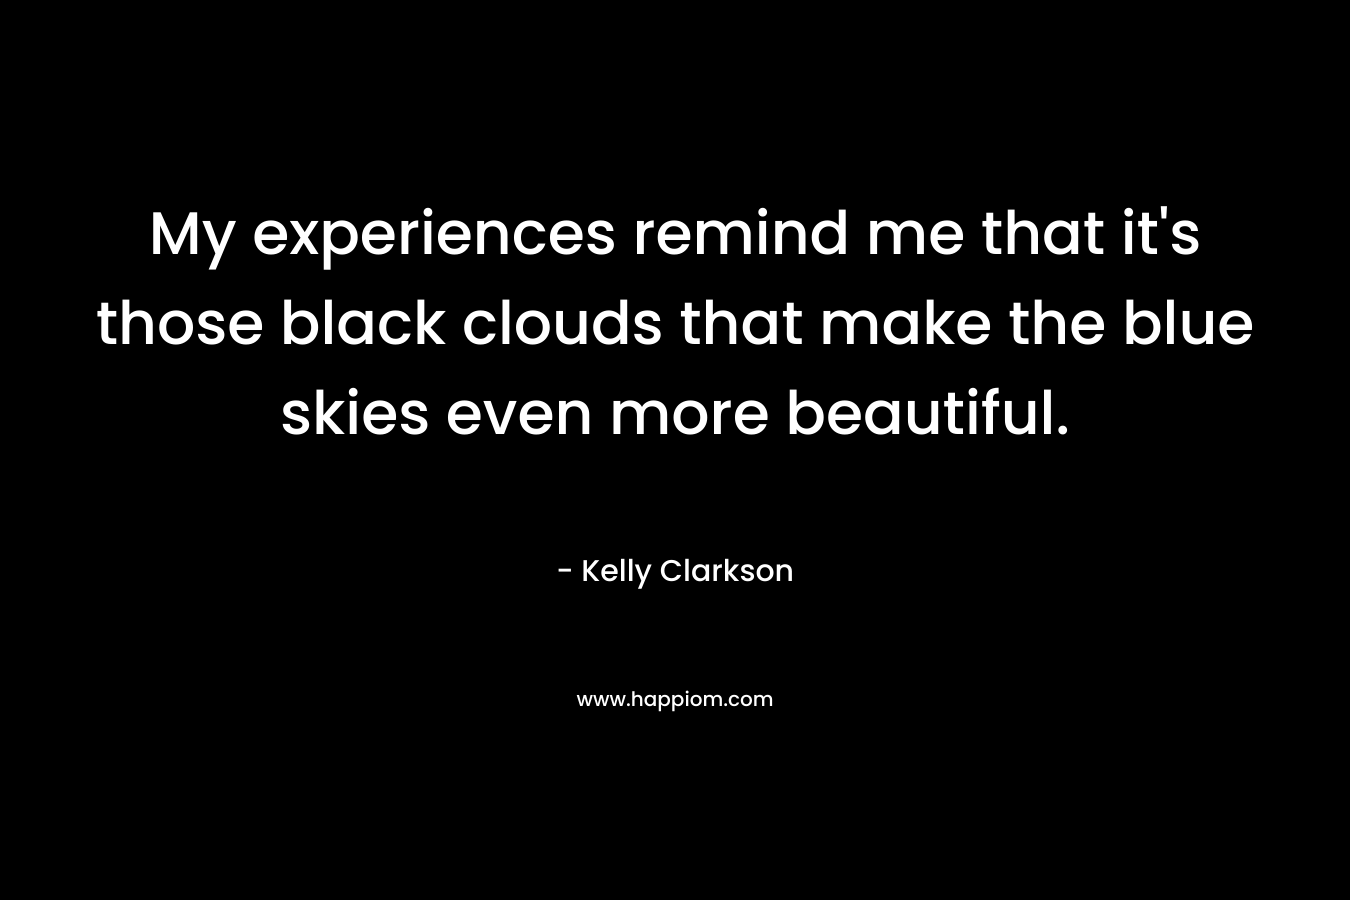 My experiences remind me that it’s those black clouds that make the blue skies even more beautiful. – Kelly Clarkson